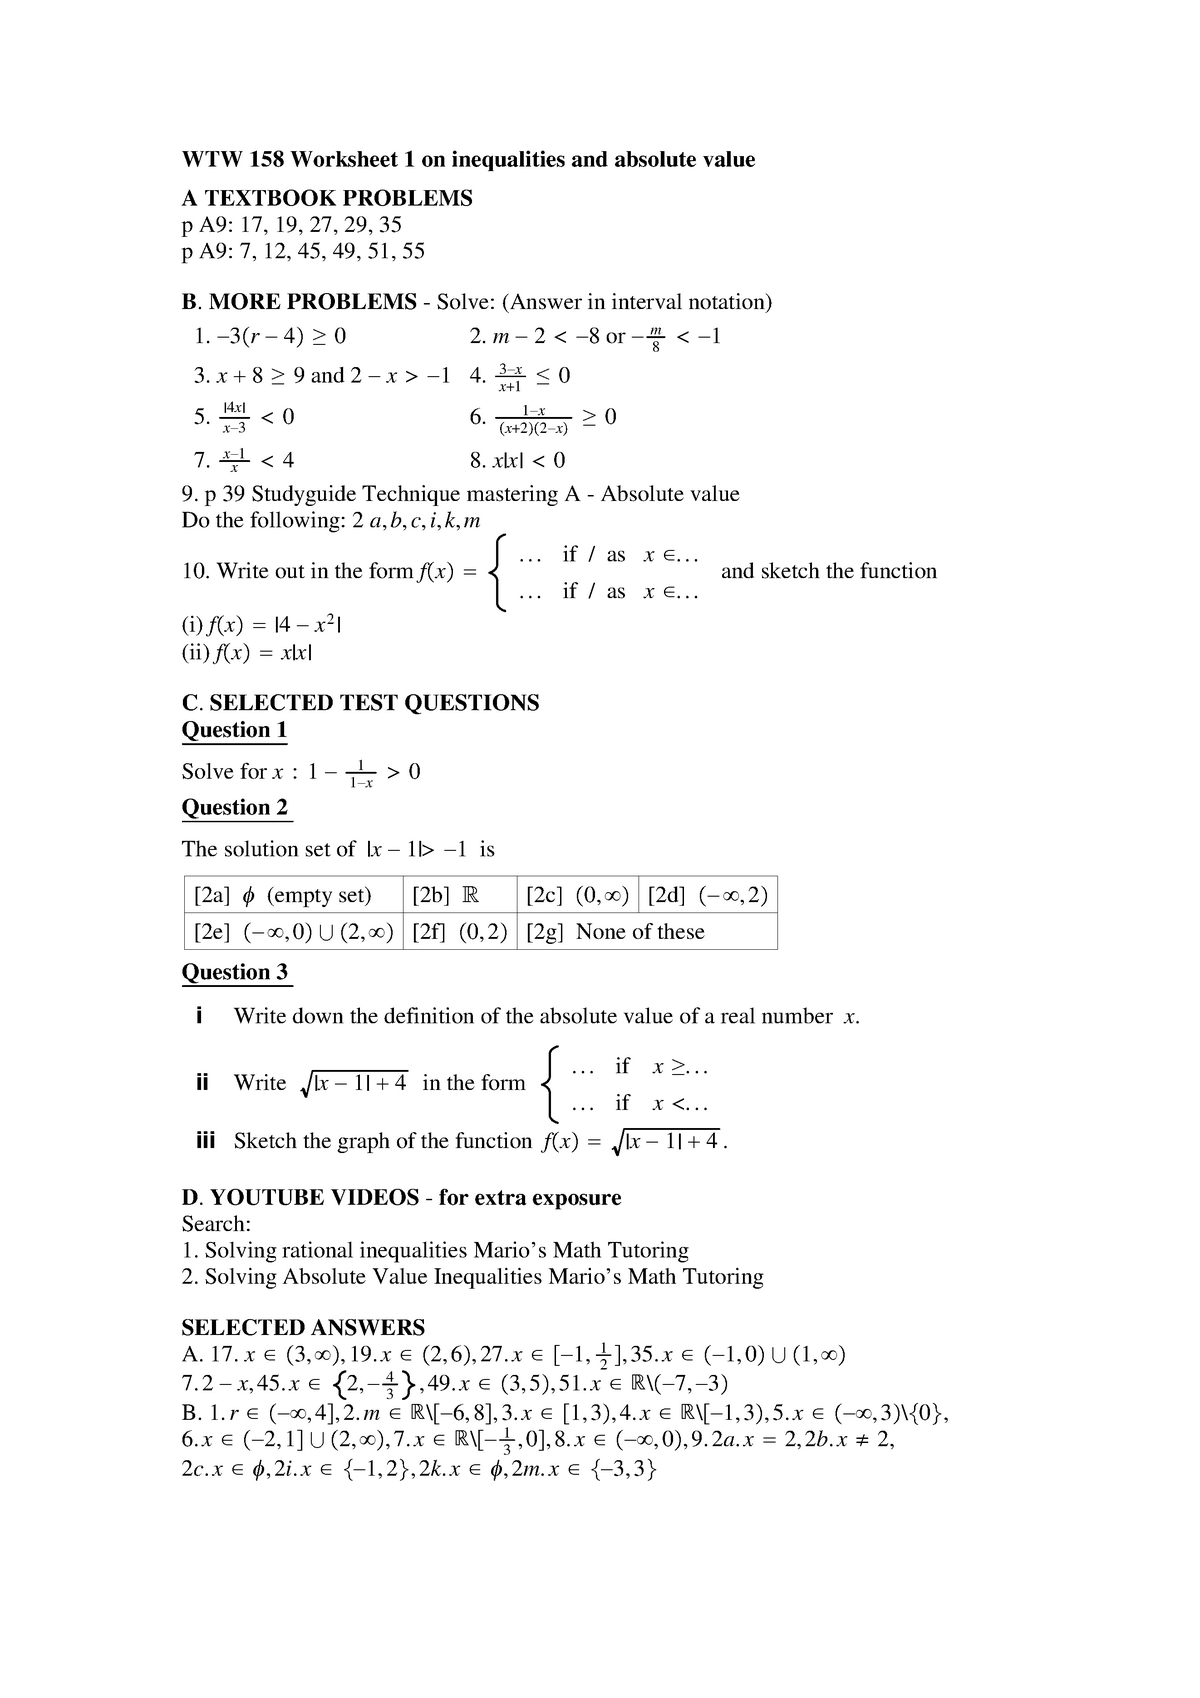 Worksheet 25 on inequalities and absolute value - Calculus 2558 Regarding Absolute Value Inequalities Worksheet